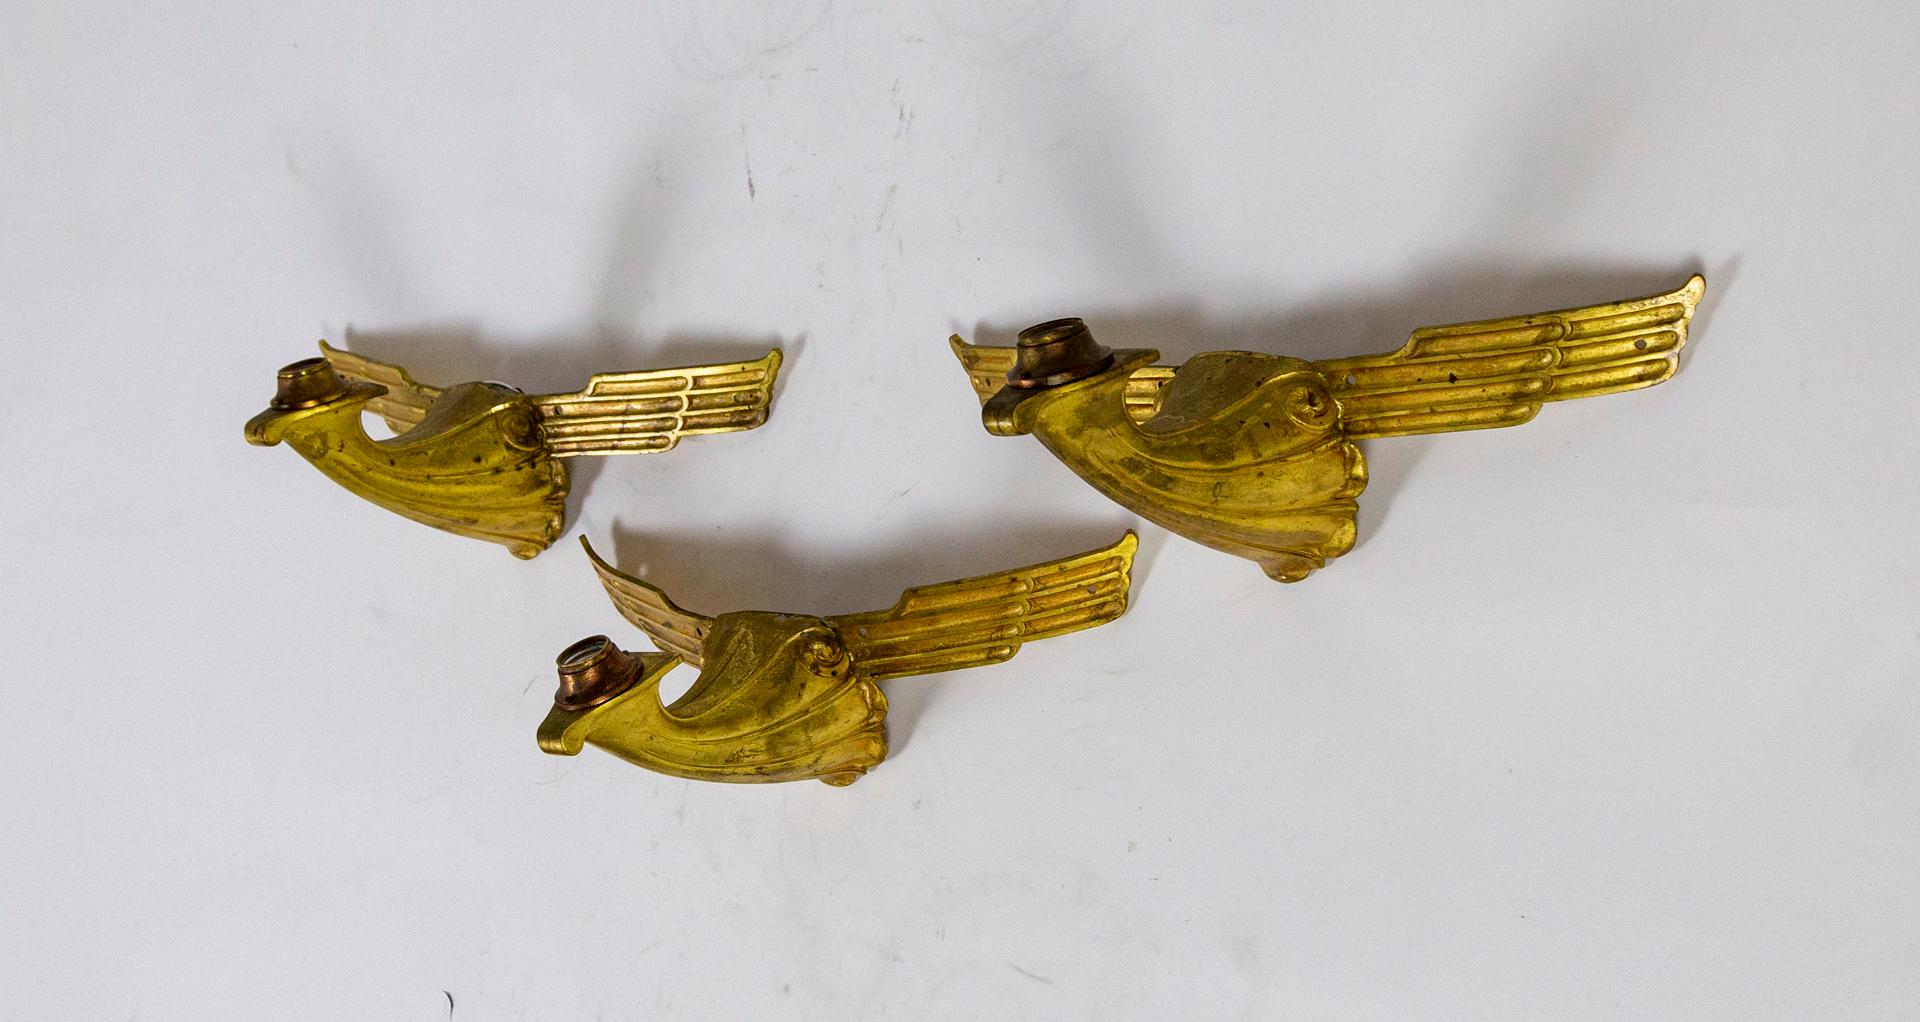 A set of 6 sconces originally installed on columns of the historic, temple-like Fox Theater which opened in Oakland, California in 1928. The Art Deco design, cast in solid bronze and gilded, conveys the front of an abstracted bird with outstretched